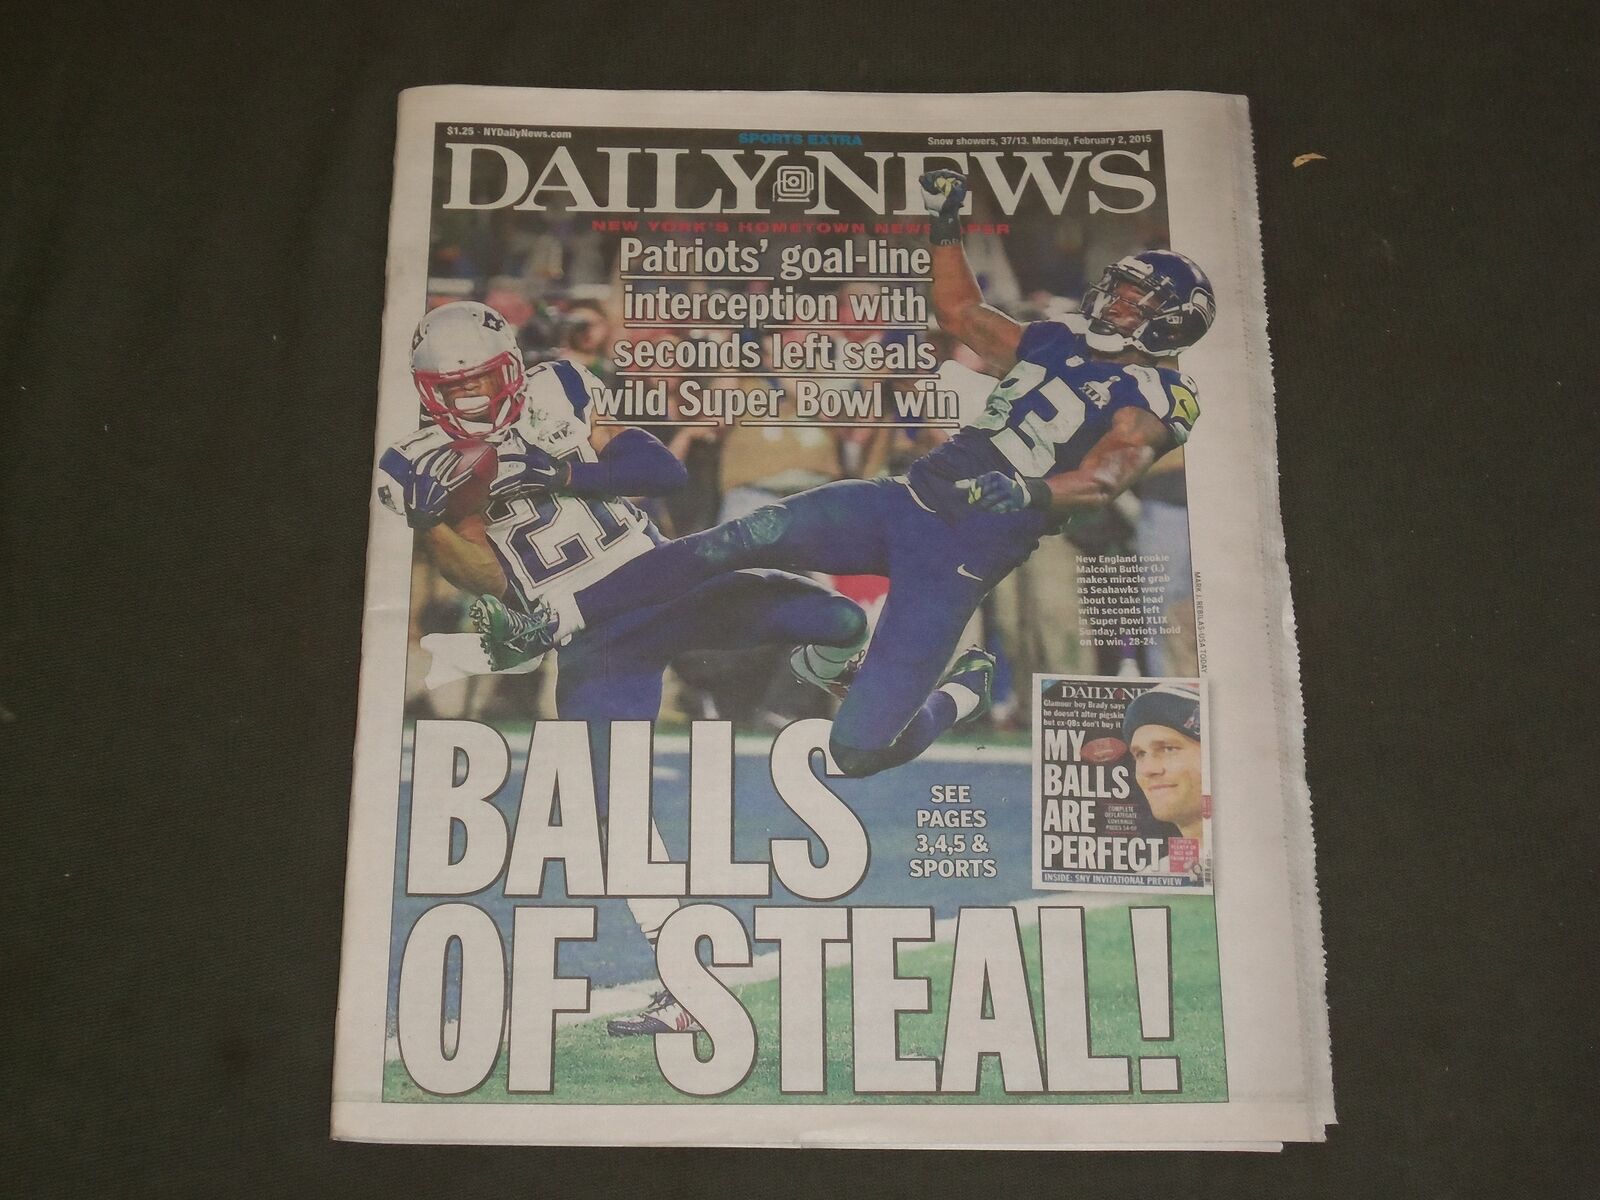 2015 FEBRUARY 2 NEW YORK DAILY NEWS - PATRIOTS WIN SUPER BOWL - BALLLS OF STEAL